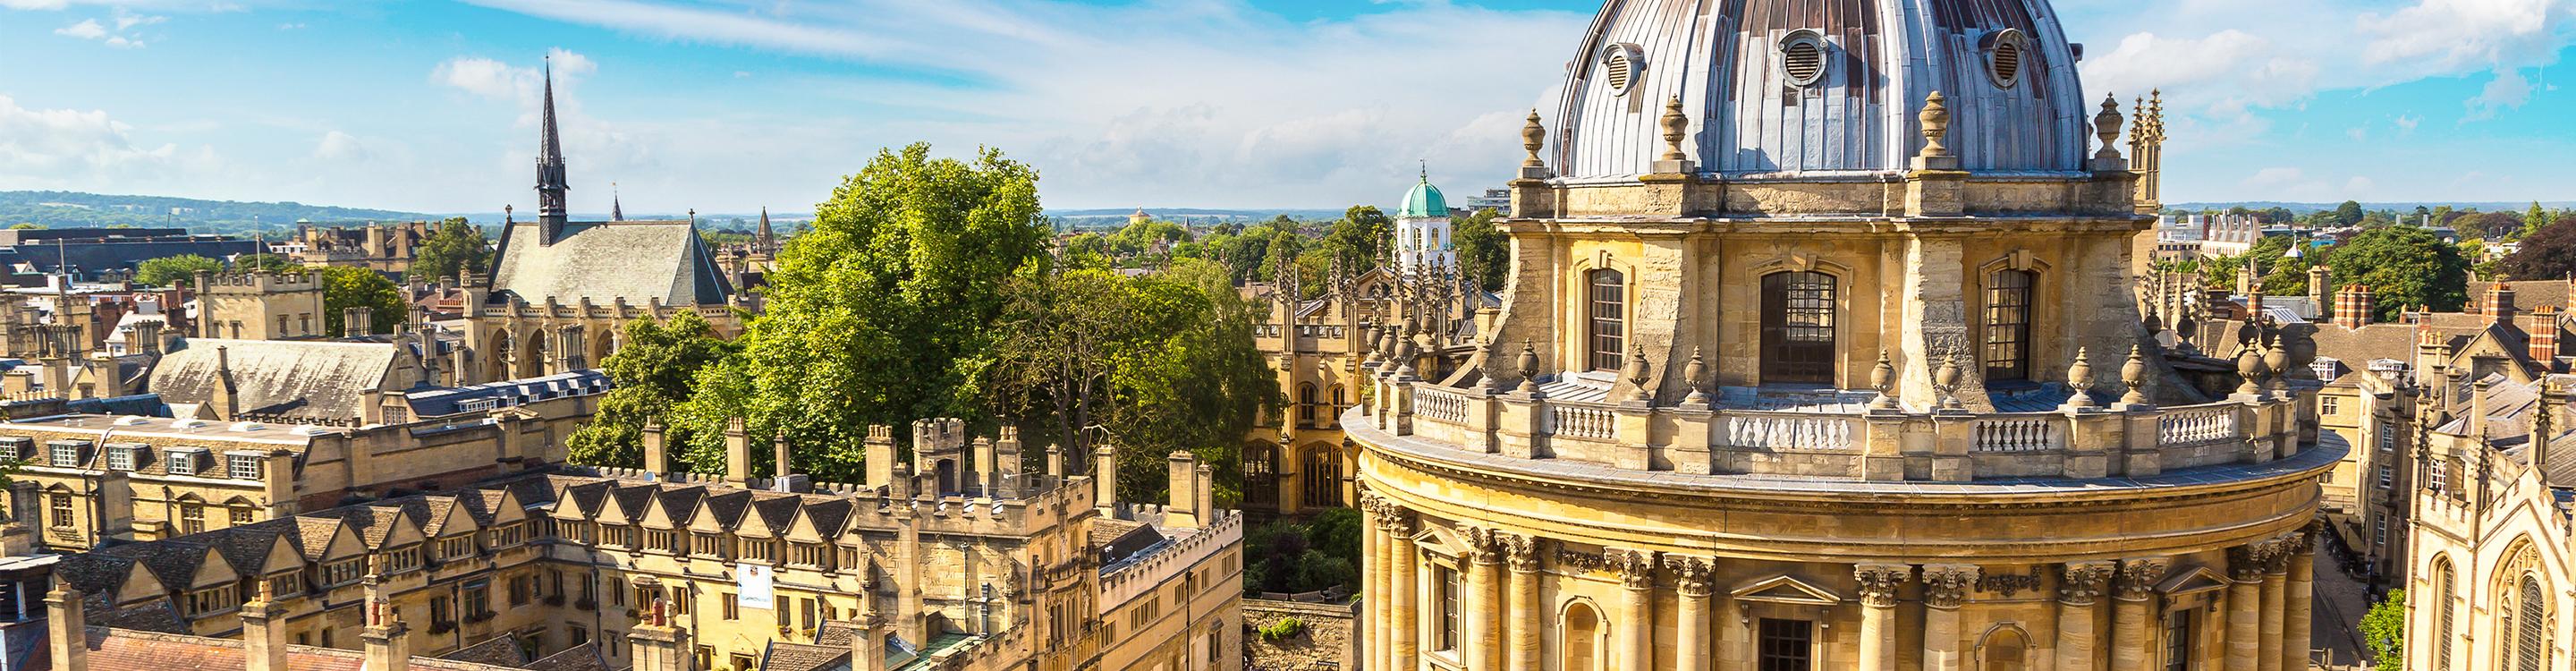 The Radcliffe Camera in Oxford, seen from on high with the city in the background